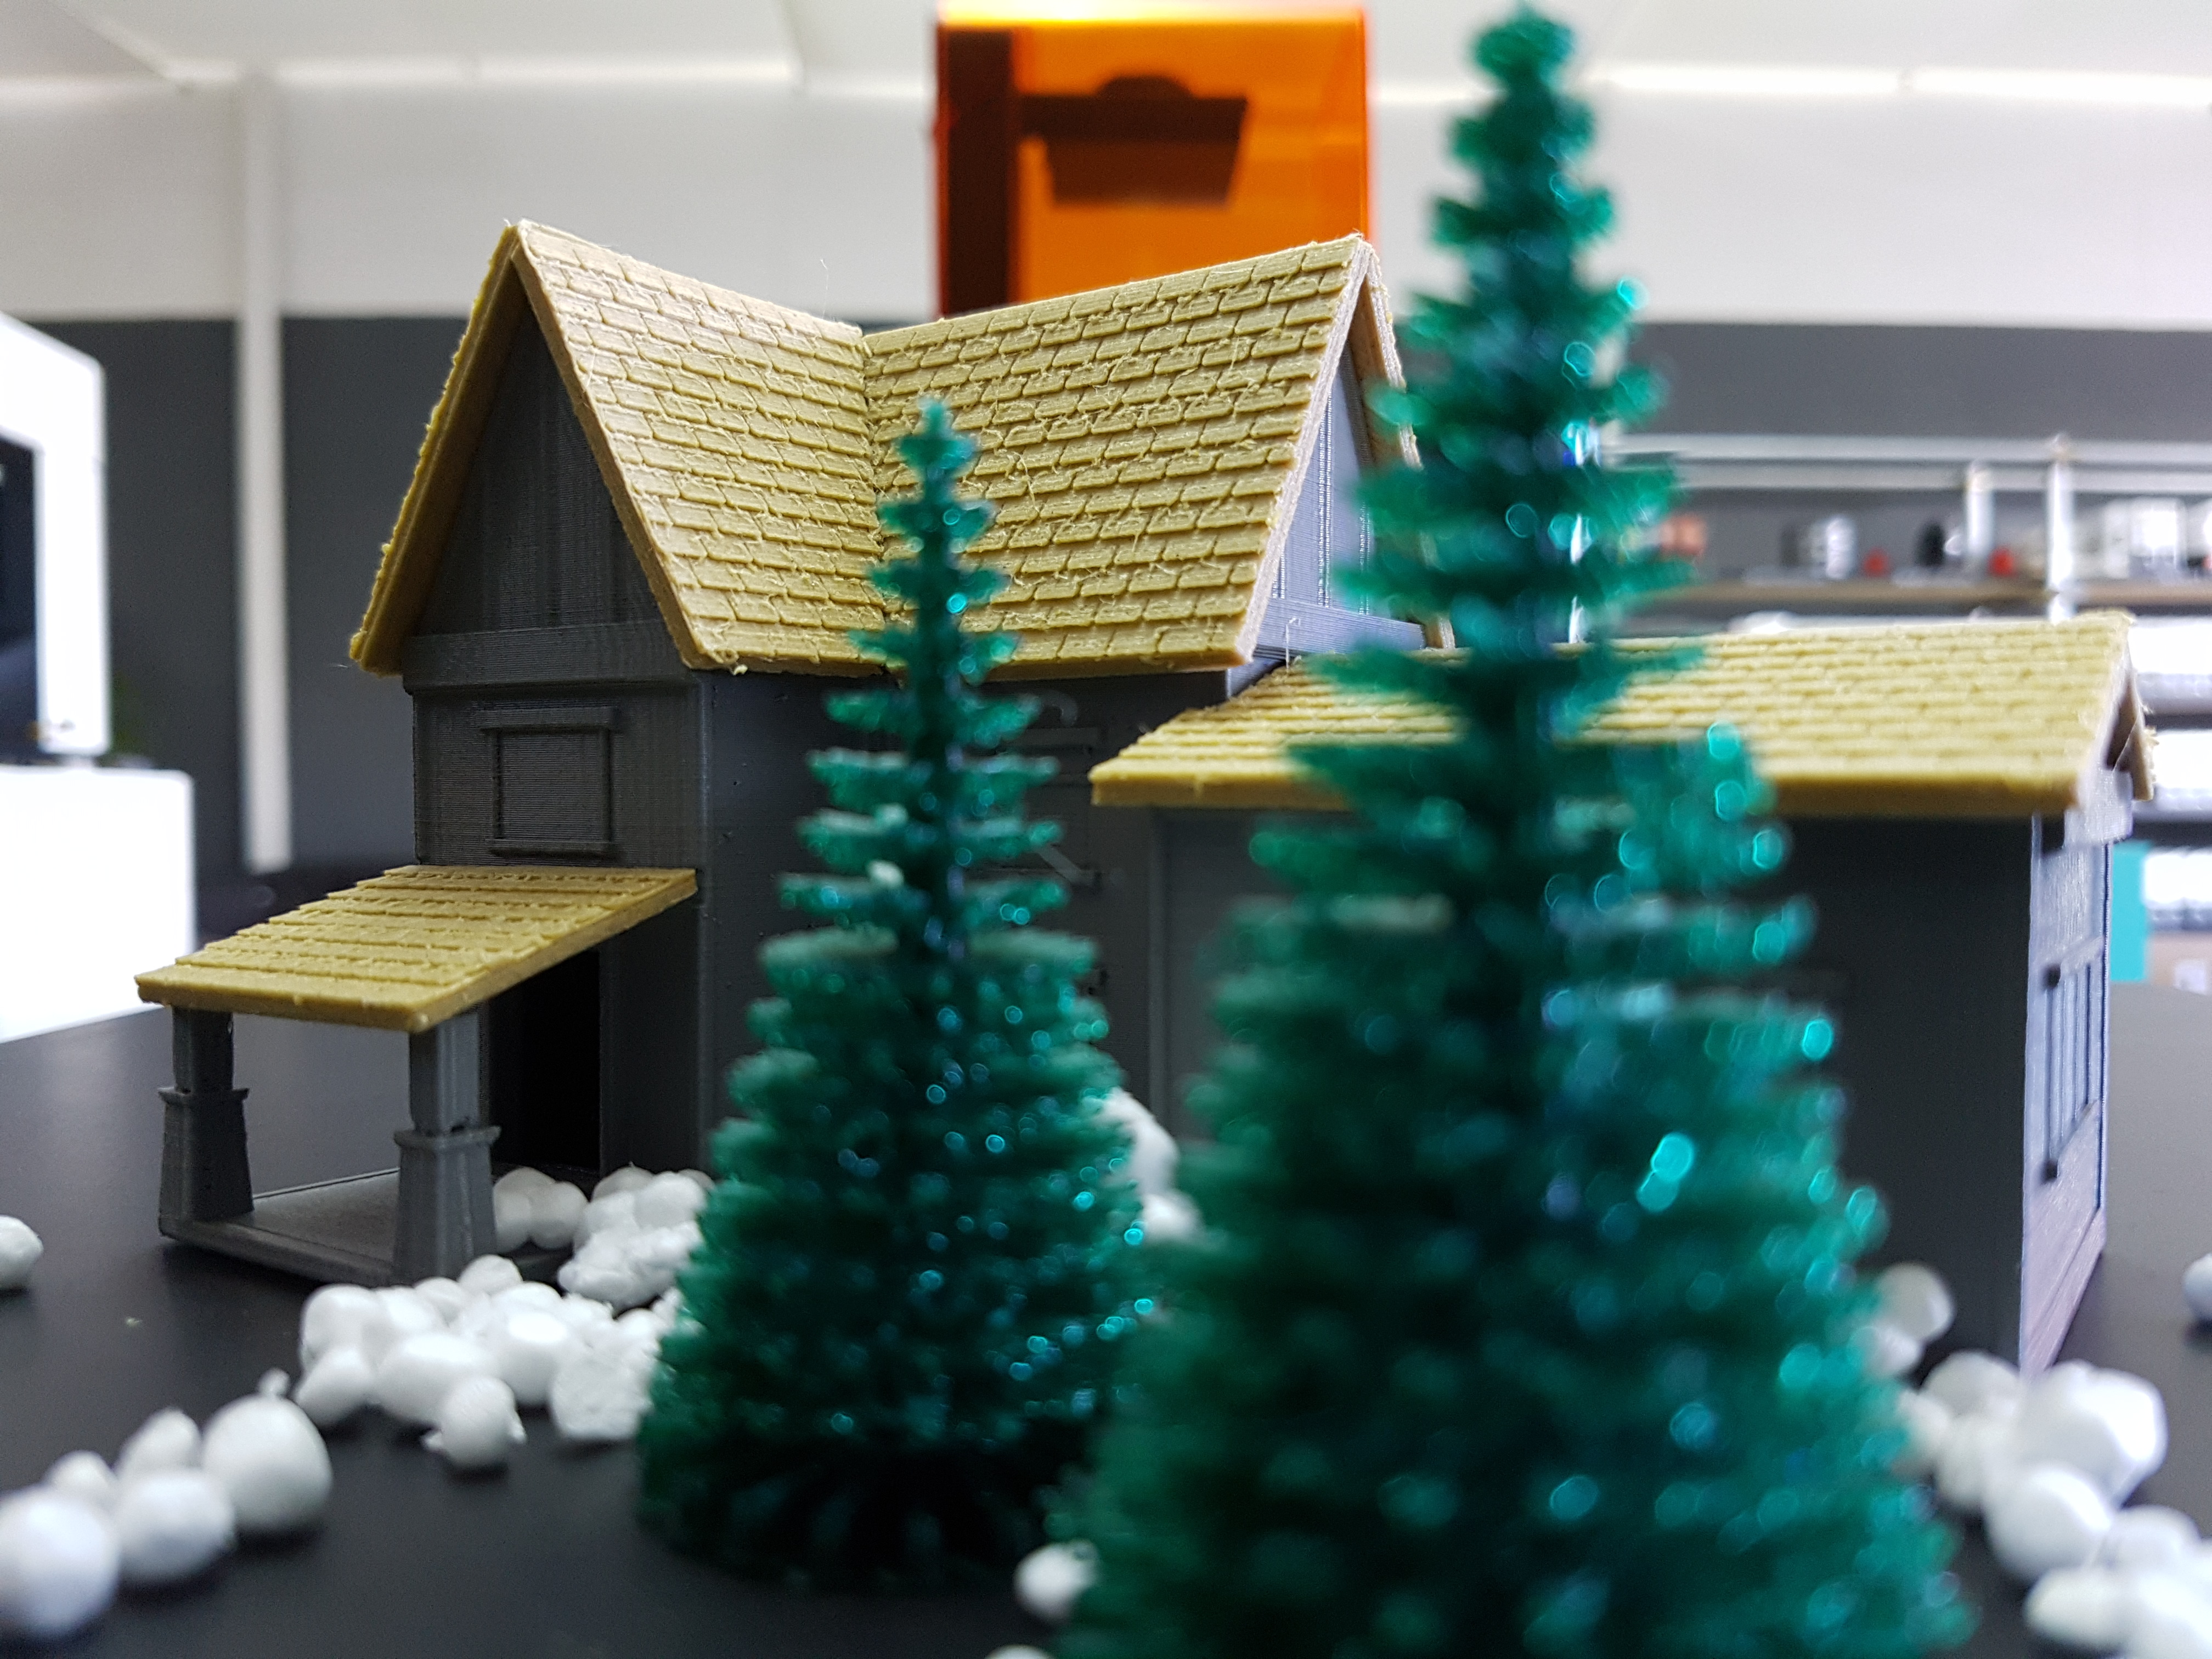 3D printed trees & wooden cabins on Ultimaker